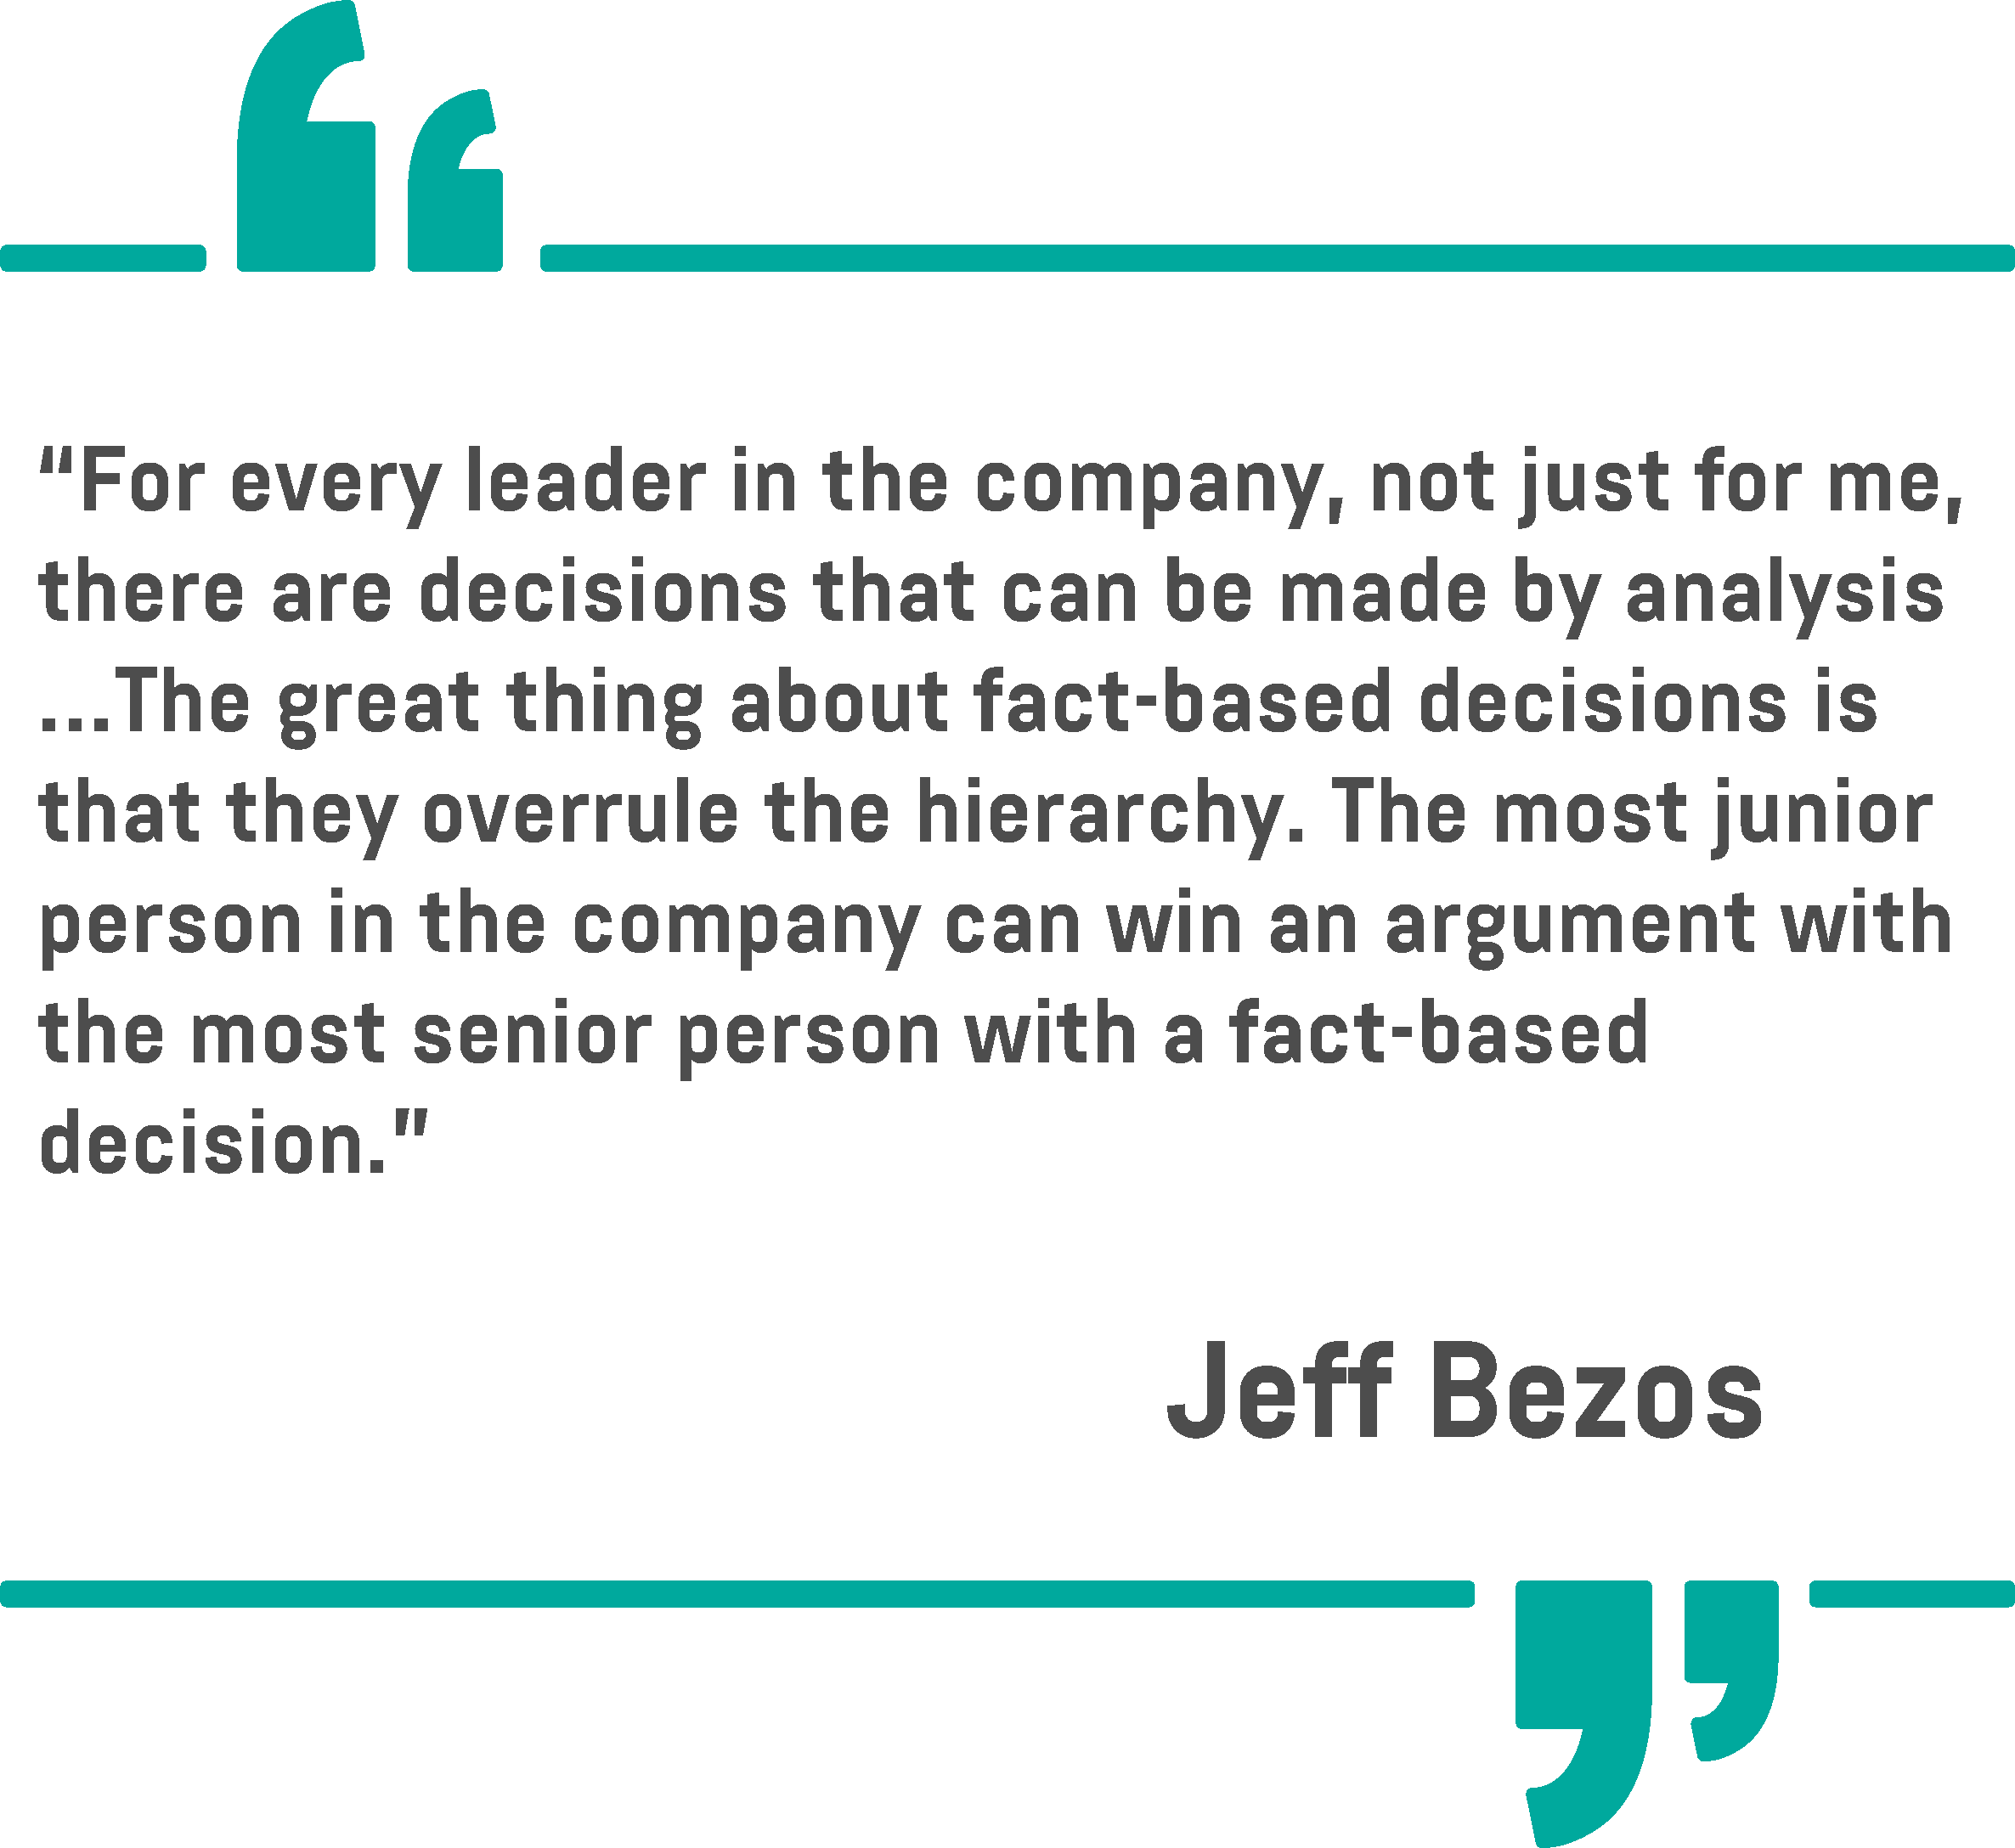  A quote from Jeff Bezos on a white background